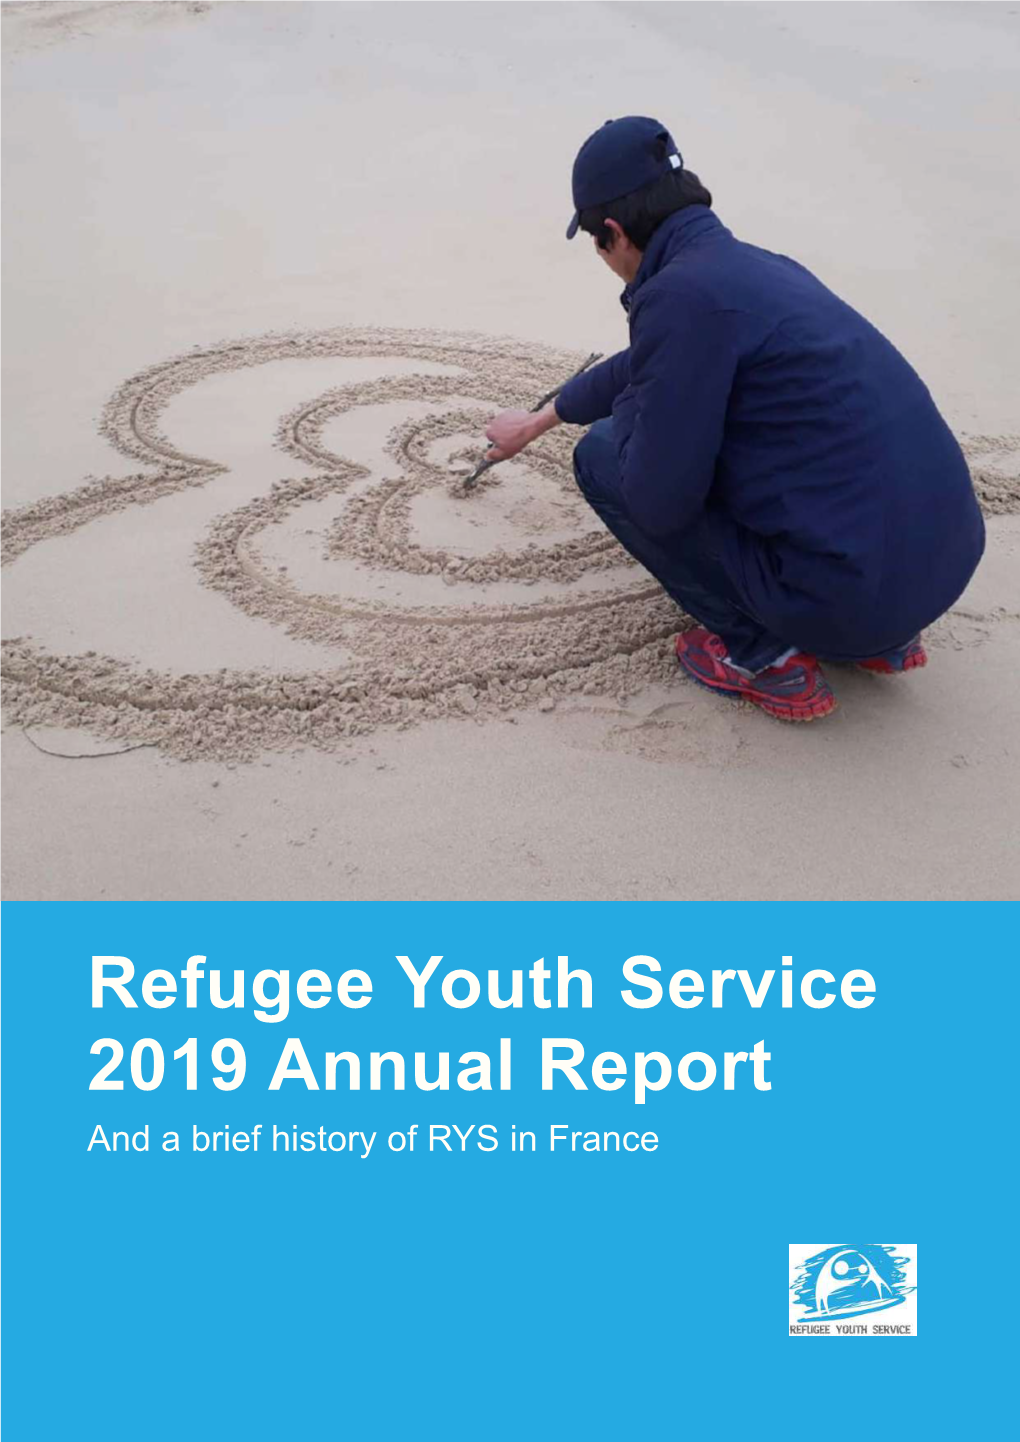 Refugee Youth Service 2019 Annual Report and a Brief History of RYS in France Content